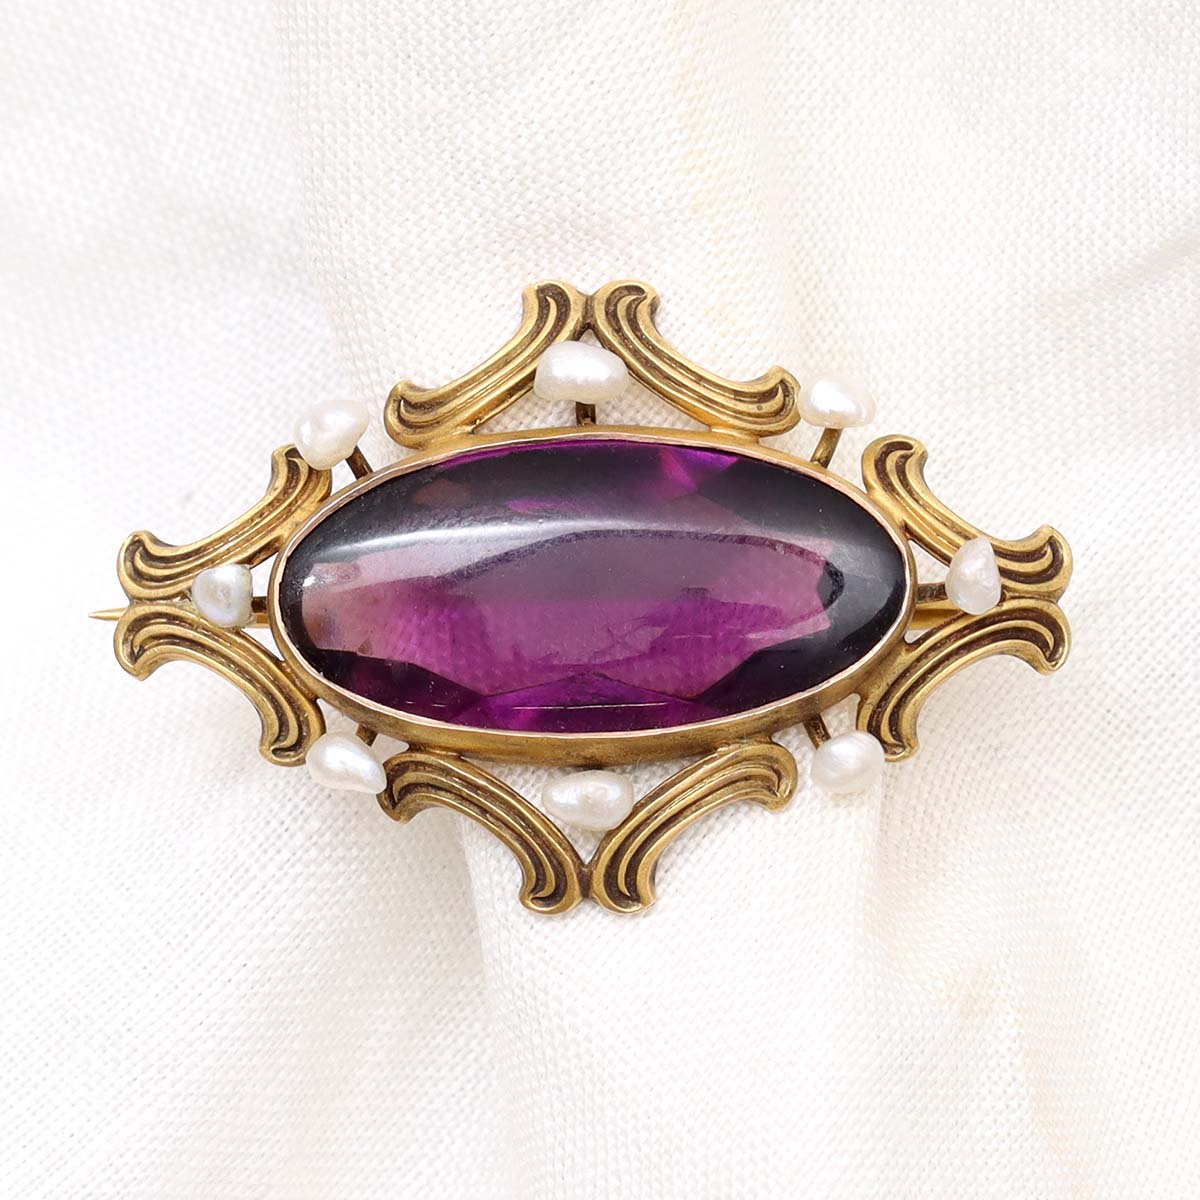 Antique 10k gold pin with seed pearls and purple cabochon quartz #Pin-05